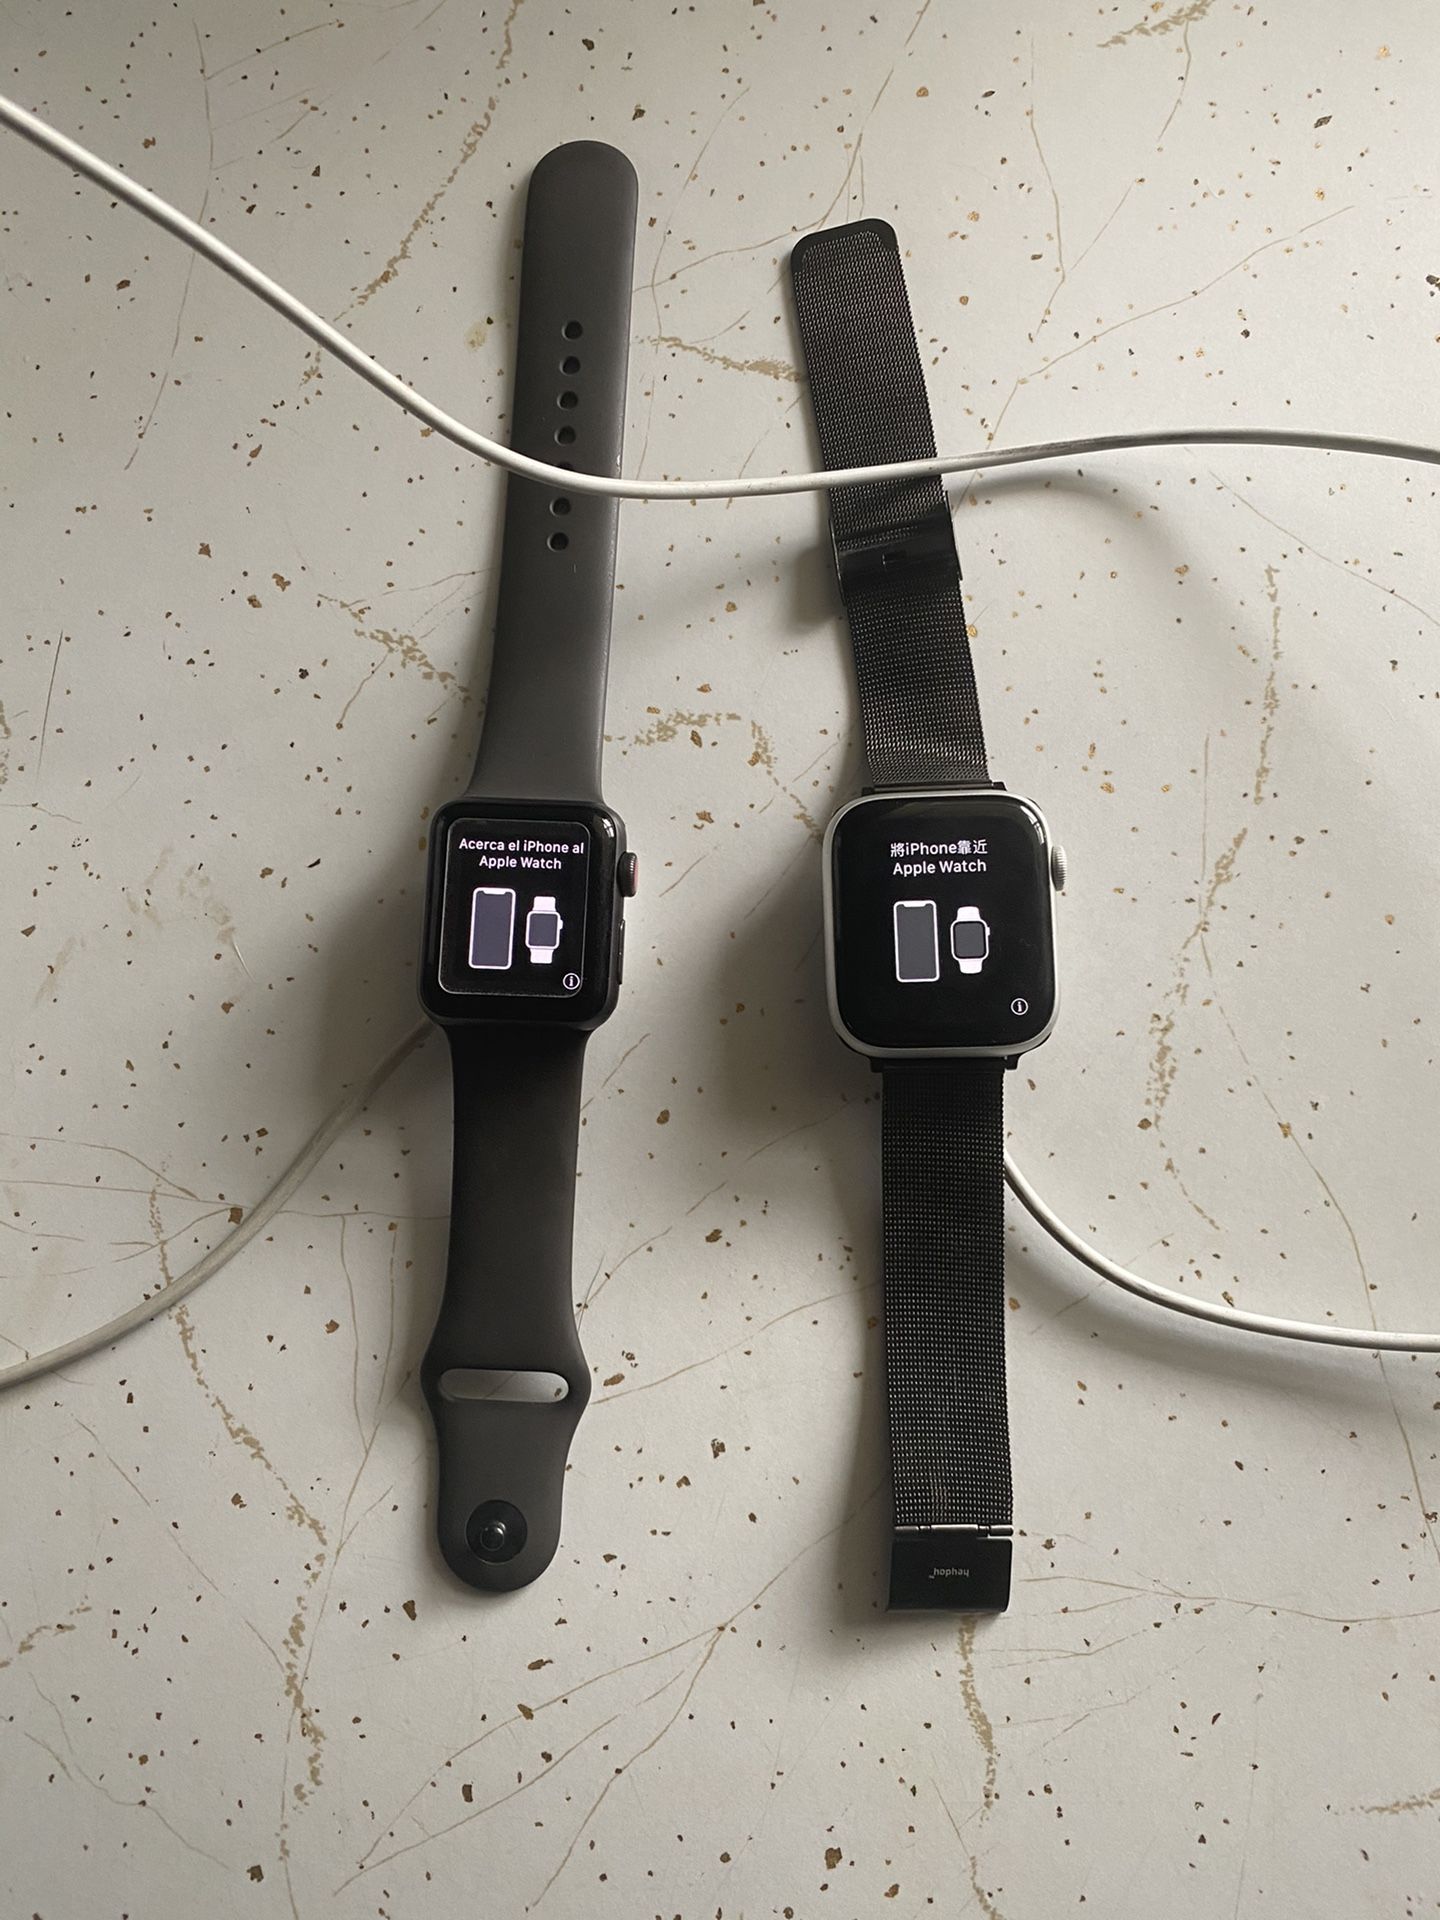 Apple Watch Series 5 And Series 3